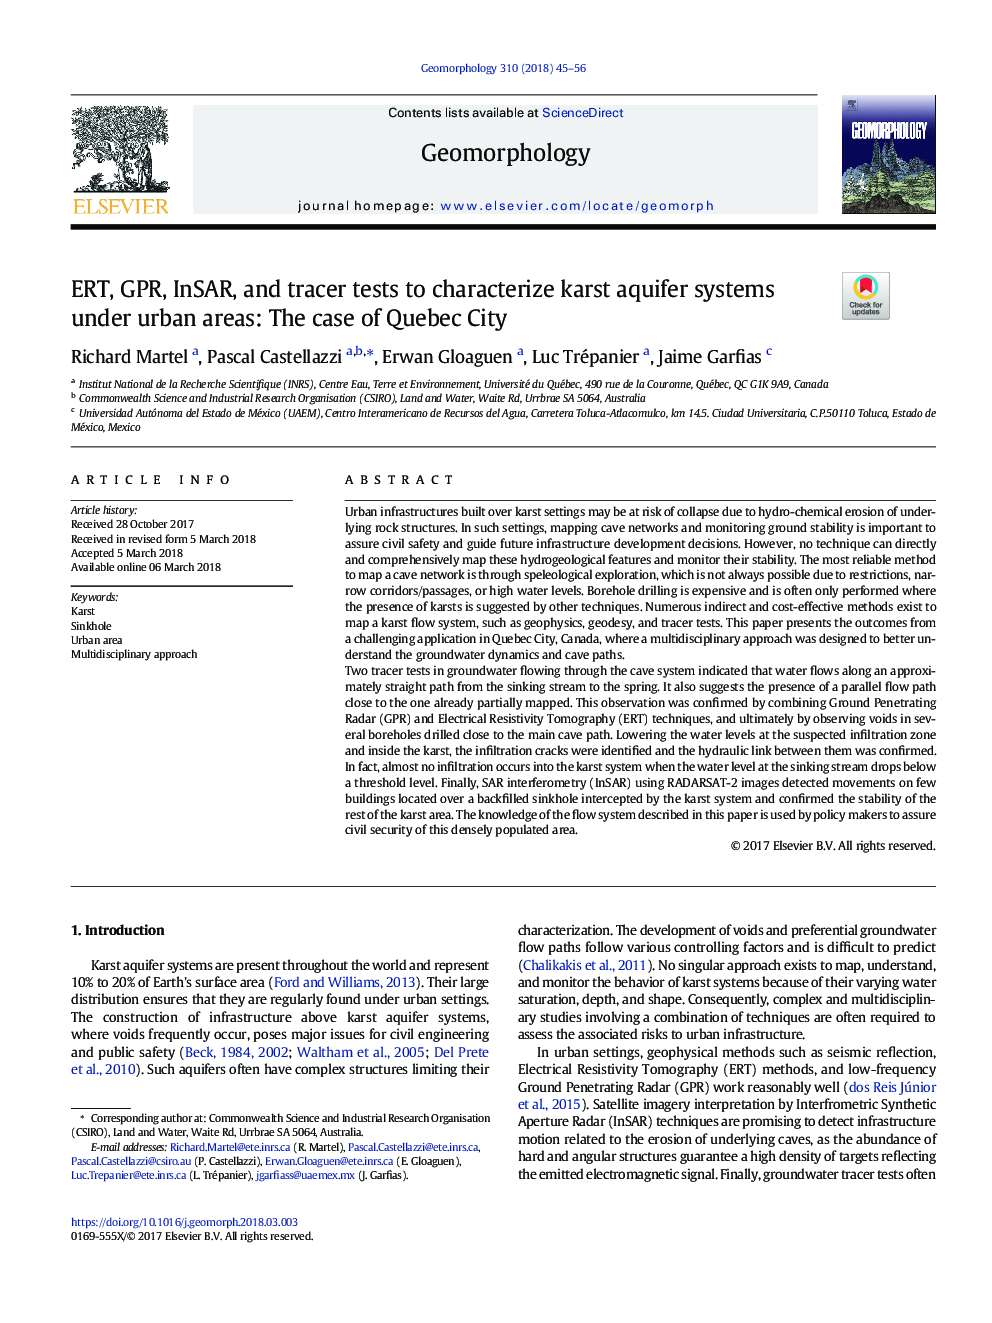 ERT, GPR, InSAR, and tracer tests to characterize karst aquifer systems under urban areas: The case of Quebec City